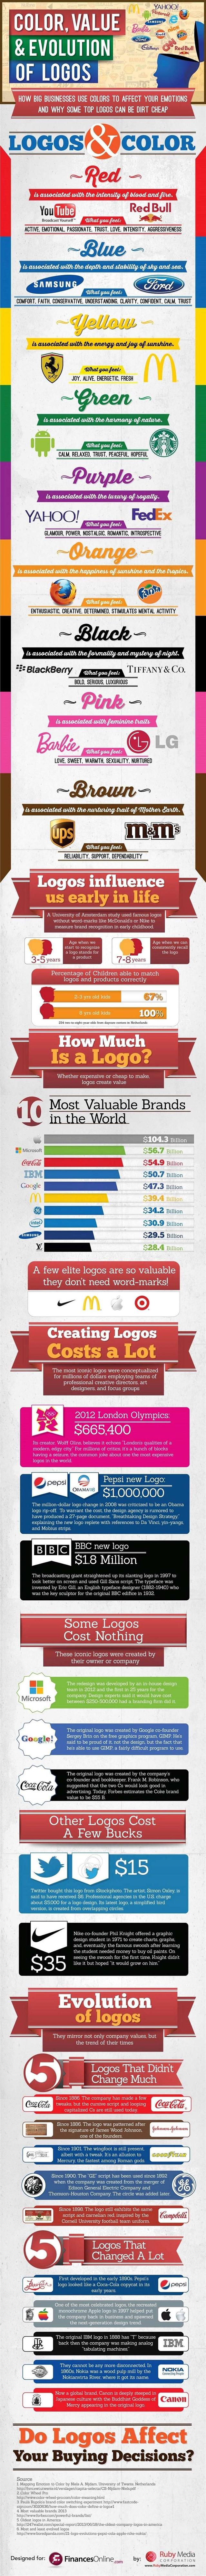 Importance of color in logos